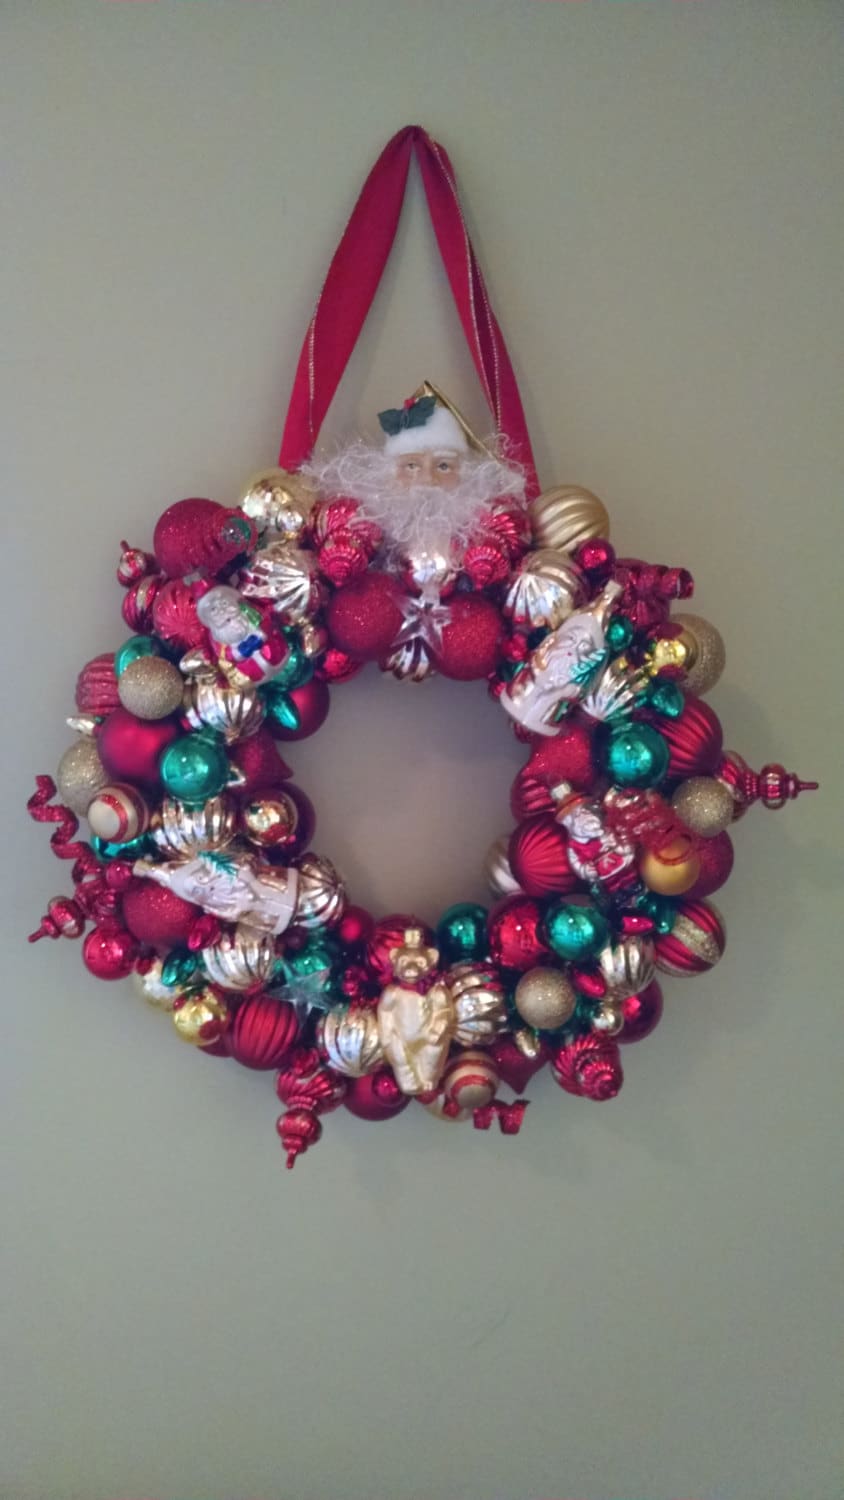 30% OFF SALE***Traditional Christmas Ornament Wreath - Red, Green and Gold Holiday Wreath